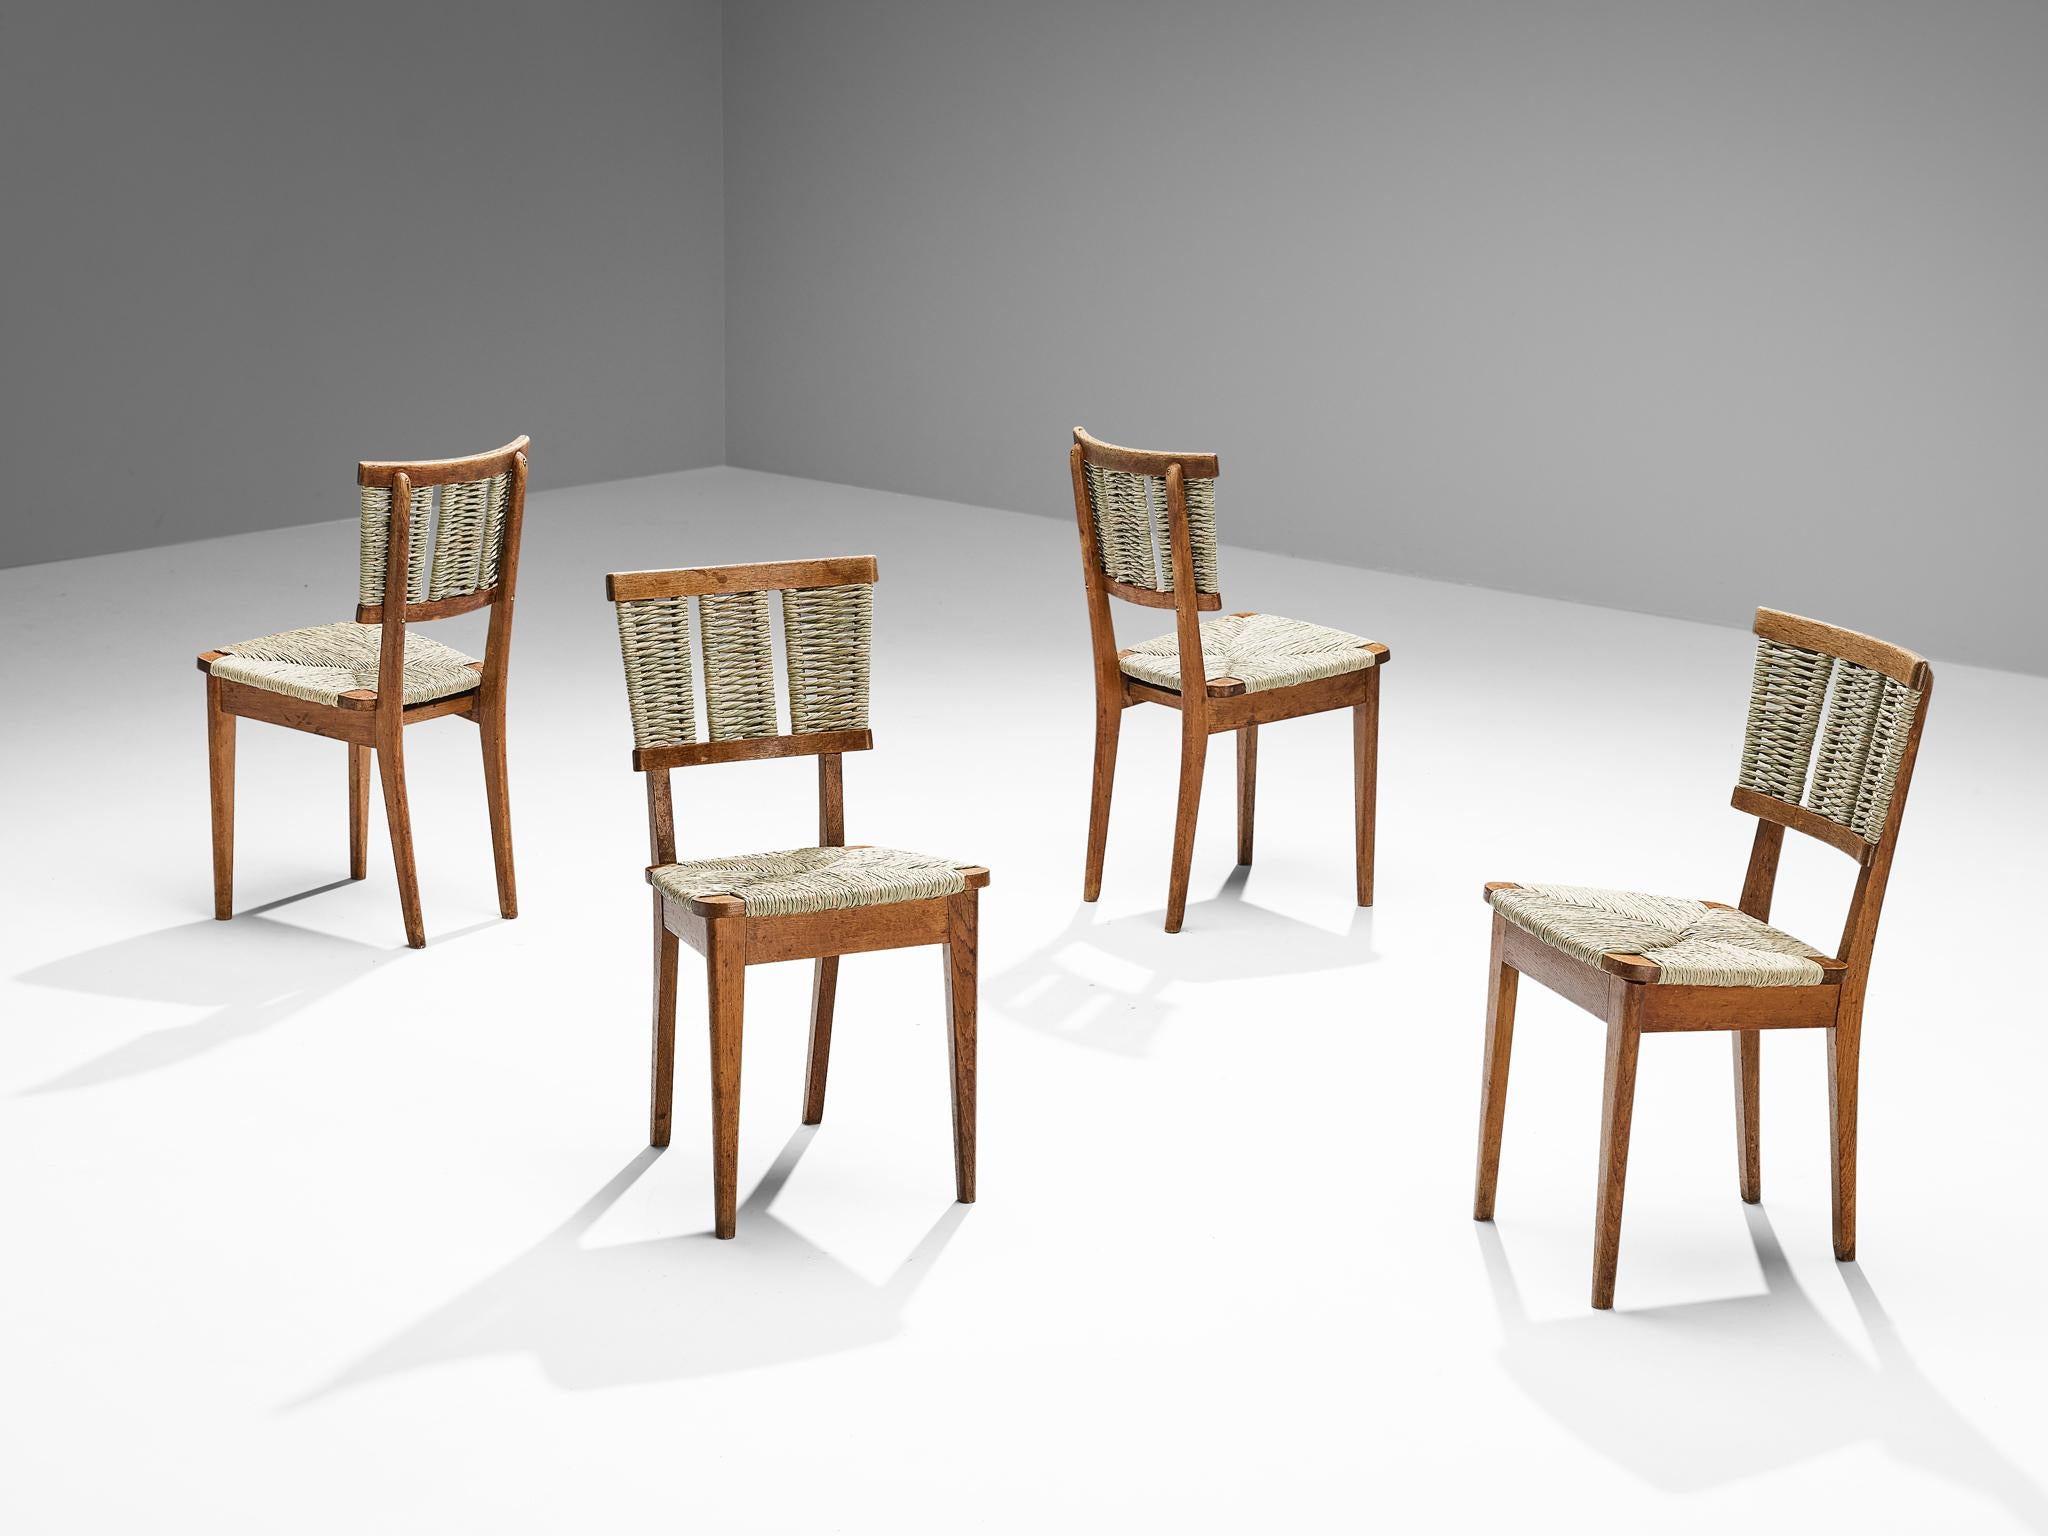 Mart Stam Set of Four Dining Chairs in Oak and Wicker Seagrass